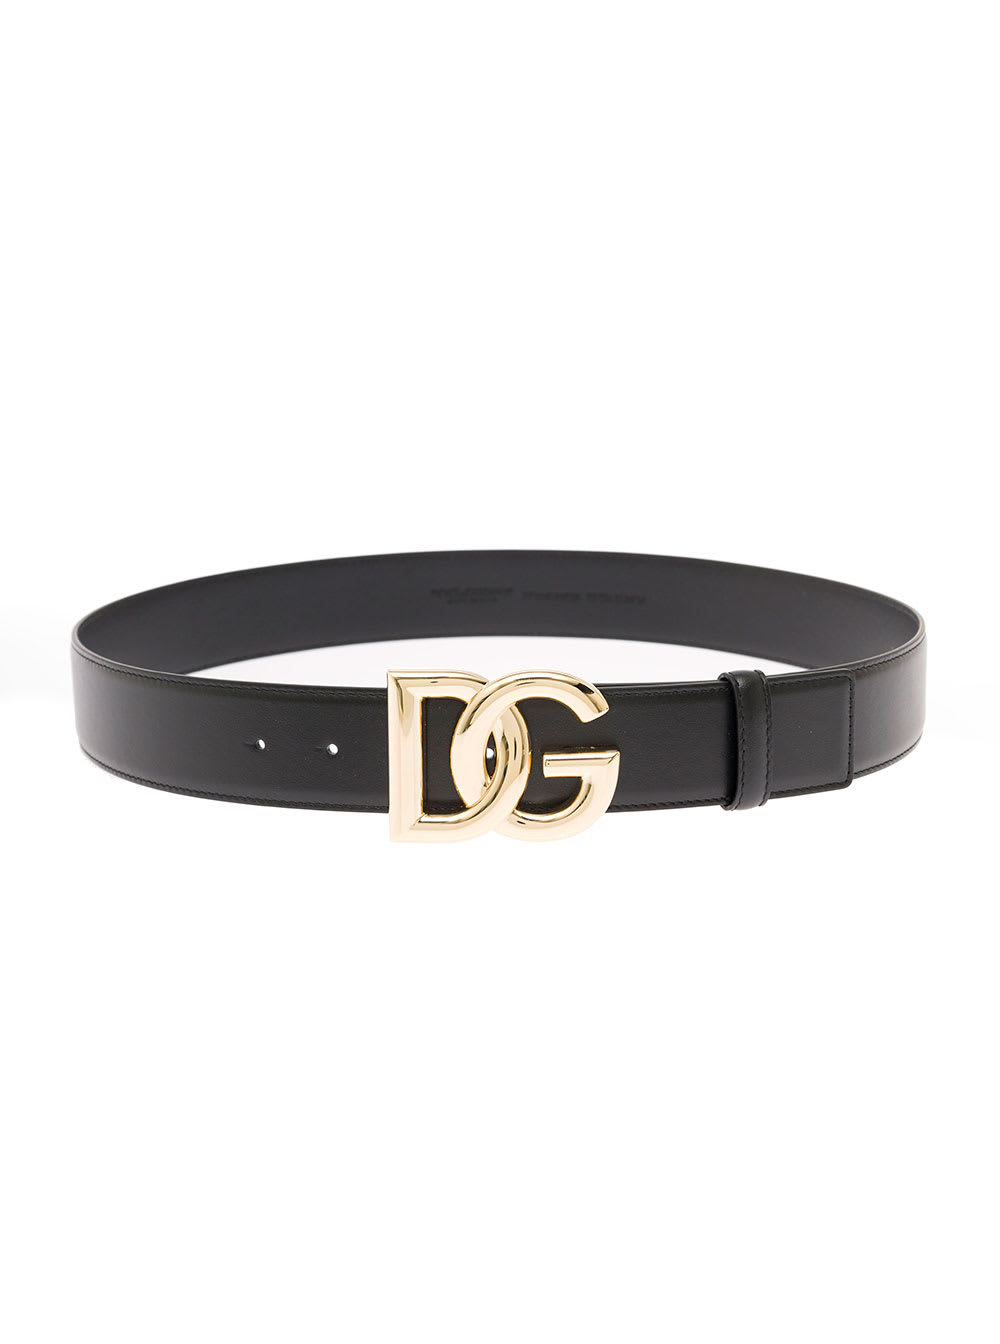 Dolce & Gabbana Womans Black Leather Belt And Logo Buckle